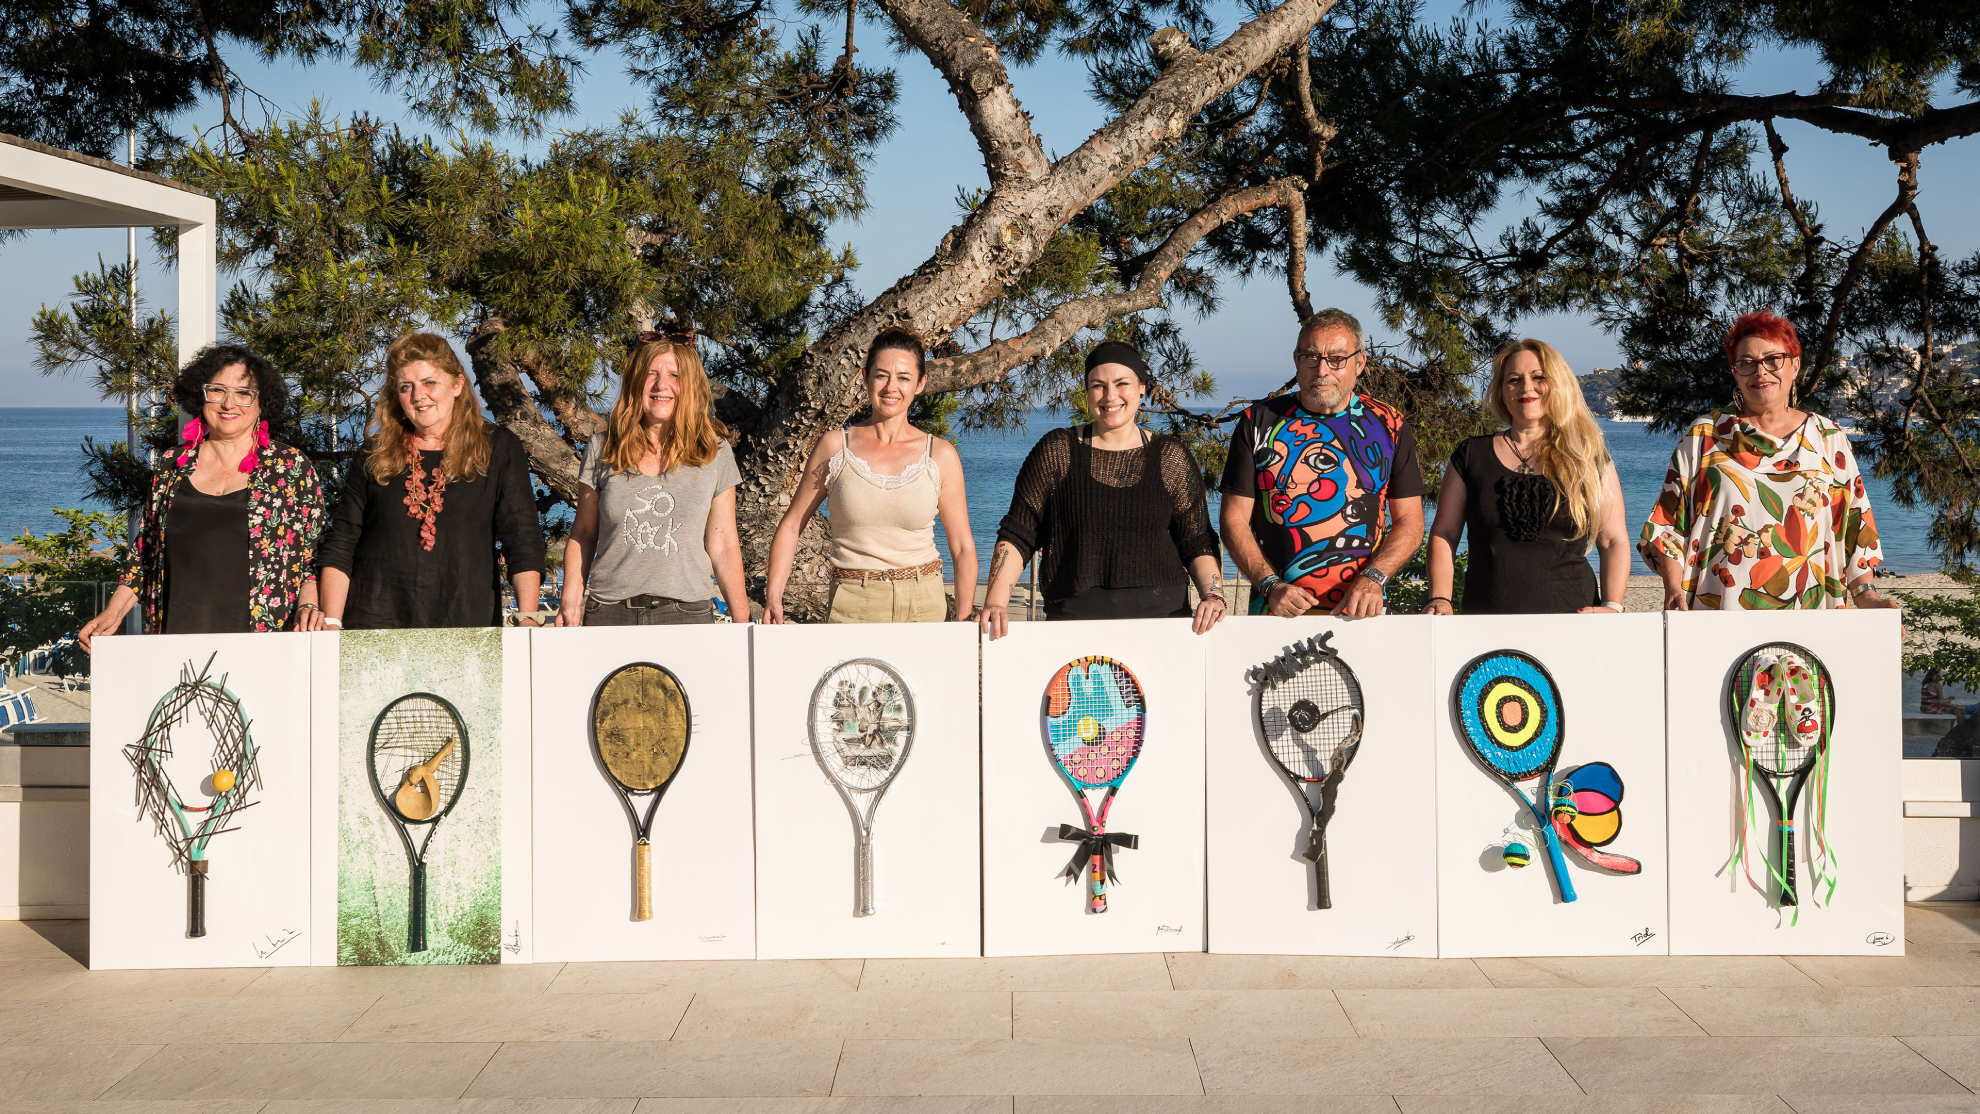 ATP250 Mallorca auctions off its first NFT collection